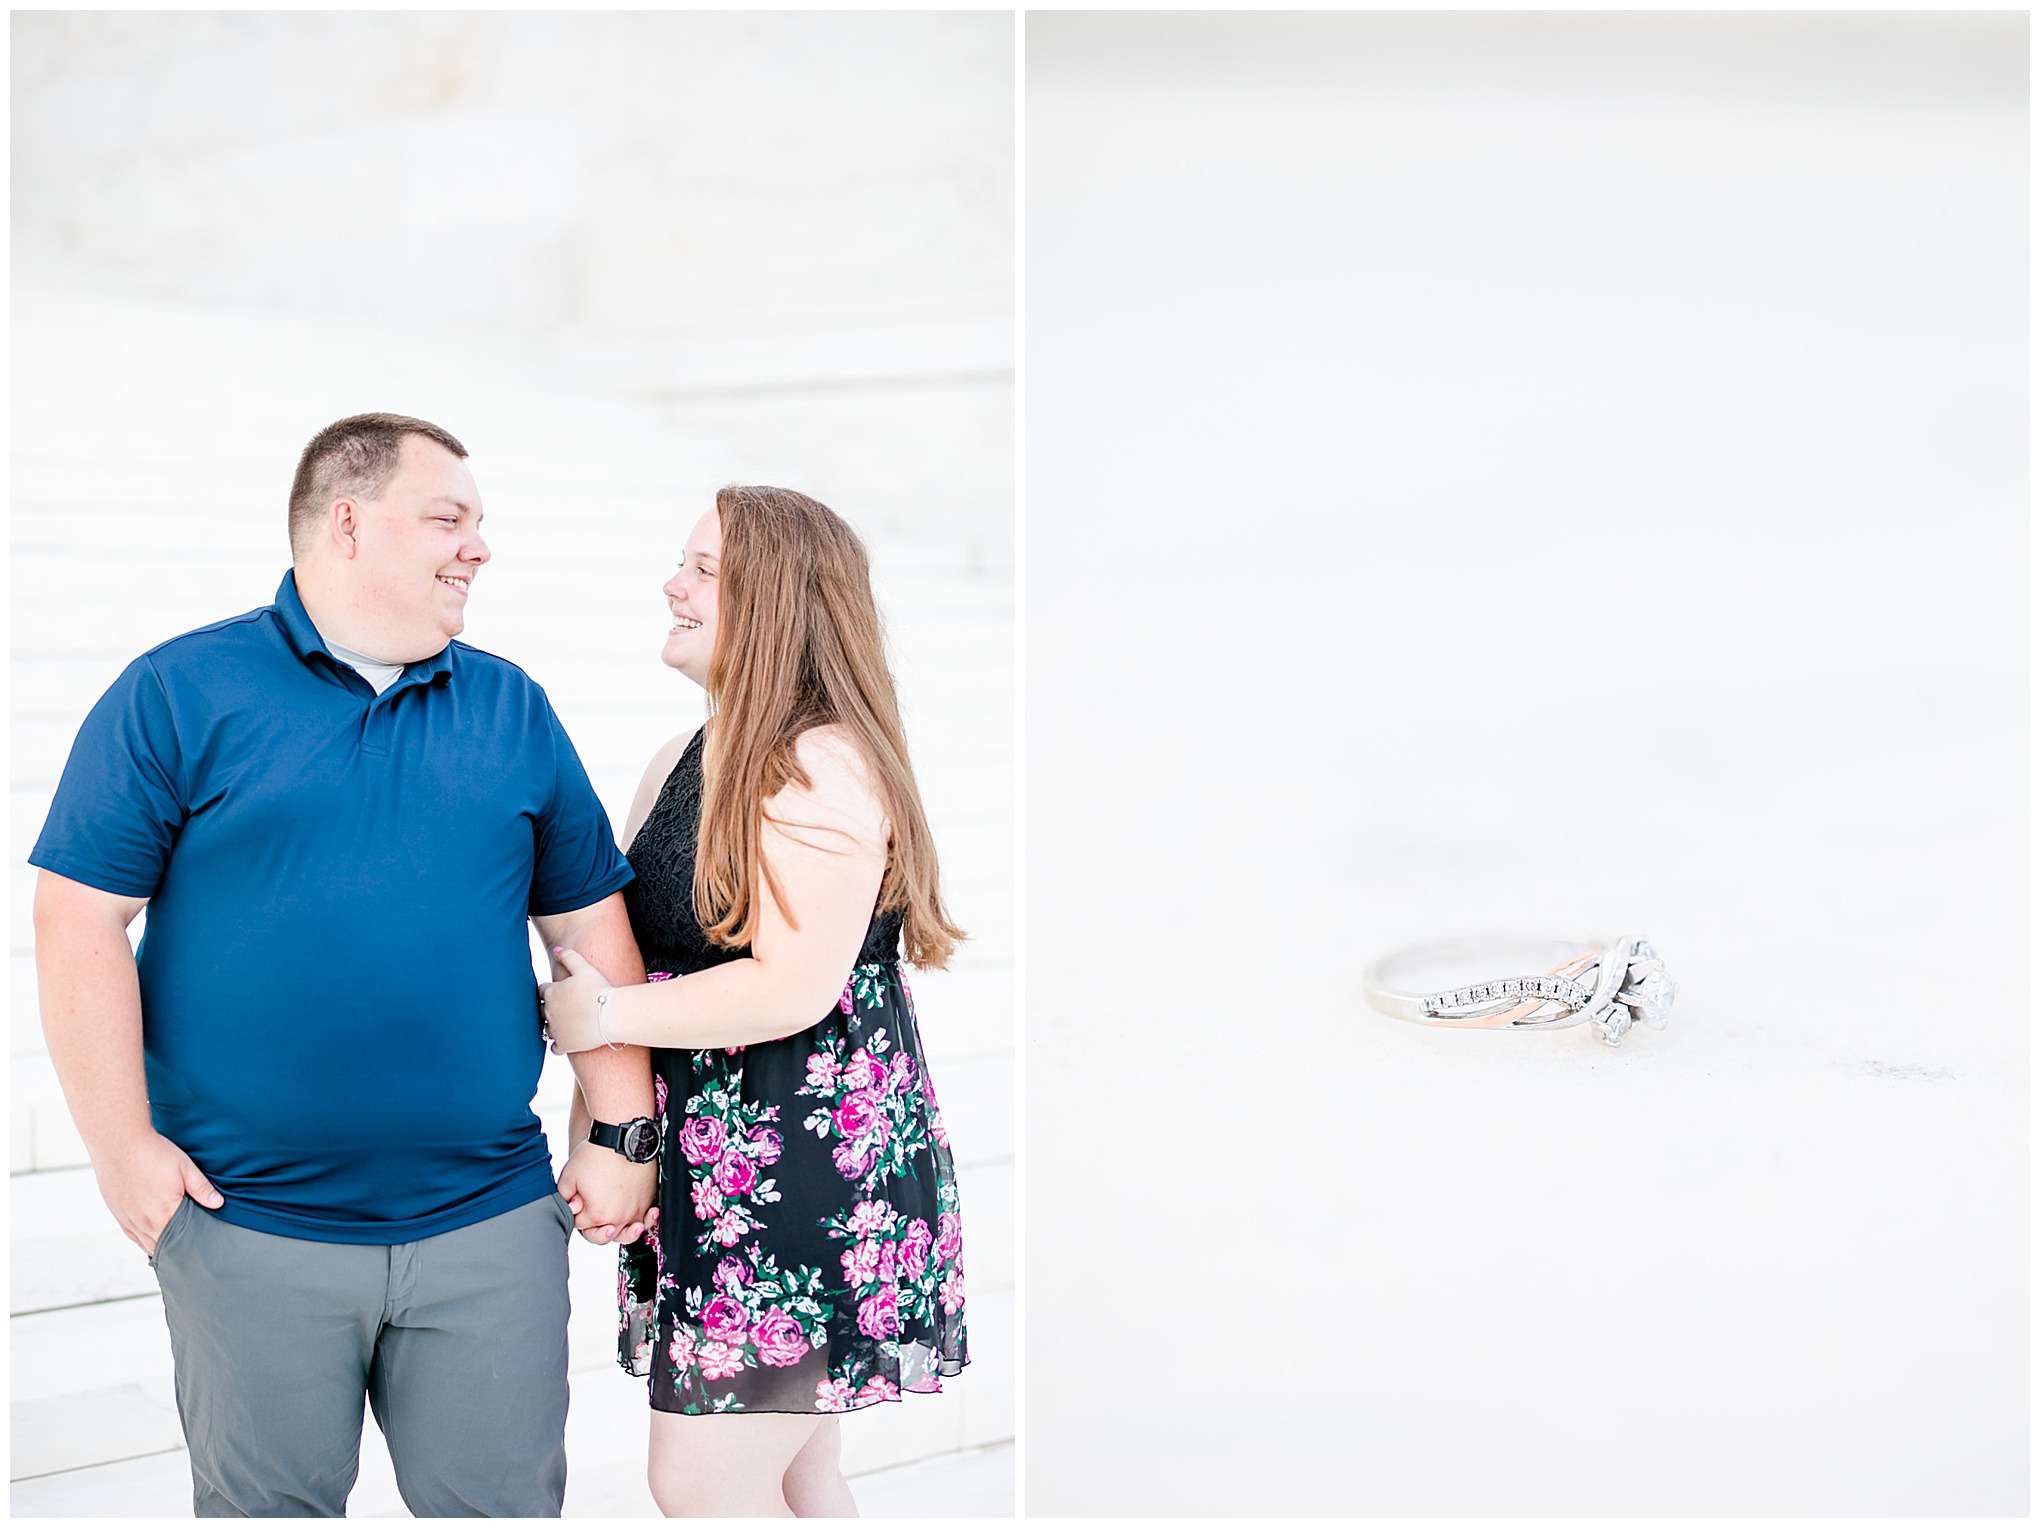 summer Capitol Hill engagement photos, Capitol Hill, Washington DC engagement photos, DC engagement photographer, DC wedding photographer, Rachel E.H. Photography, U.S. Capitol, summer engagement photos, engaged couple, engagement portraits, Supreme Court, three stone engagement ring